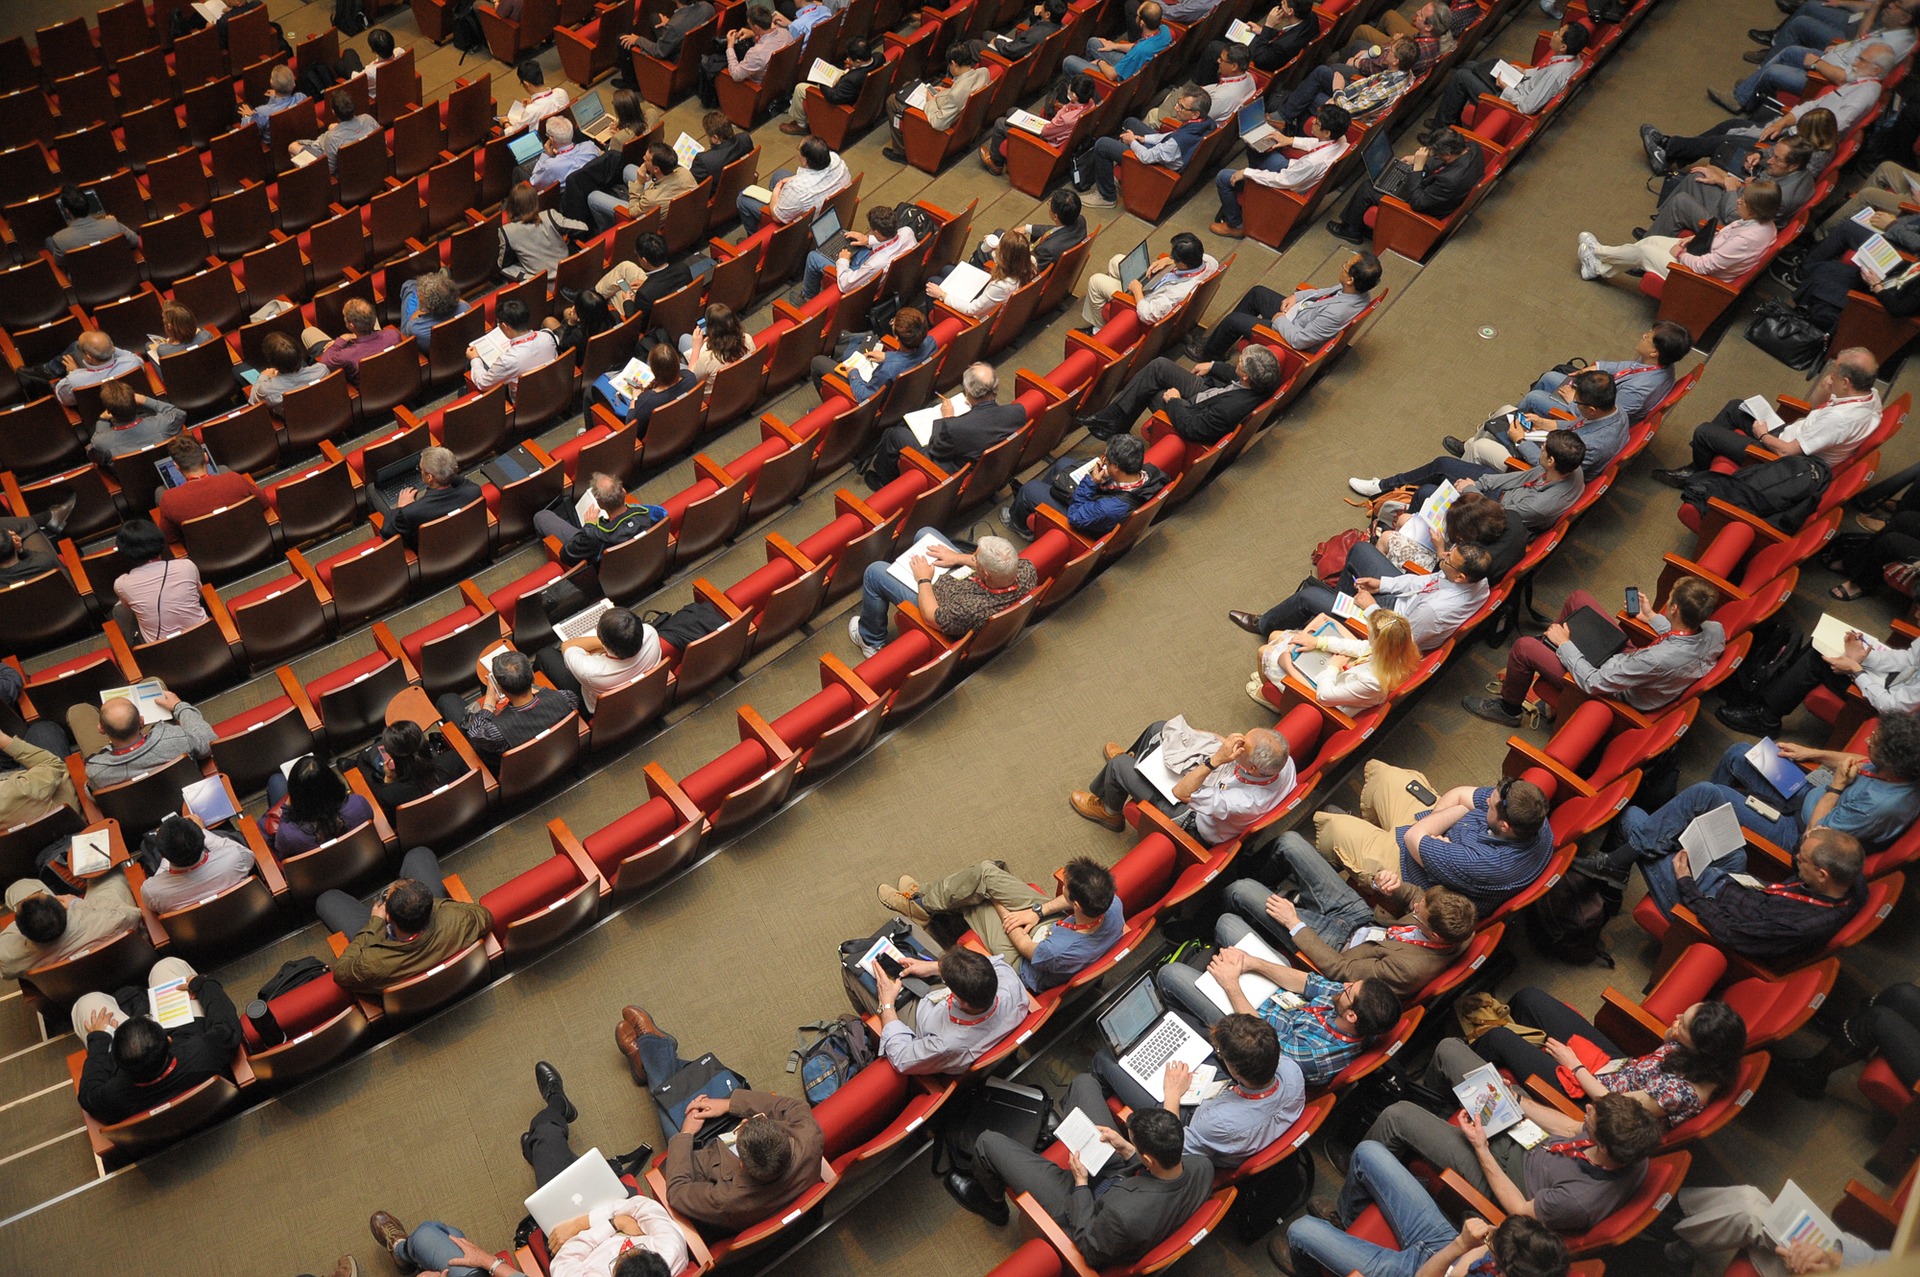 View from above of audience members seated in a large auditorium